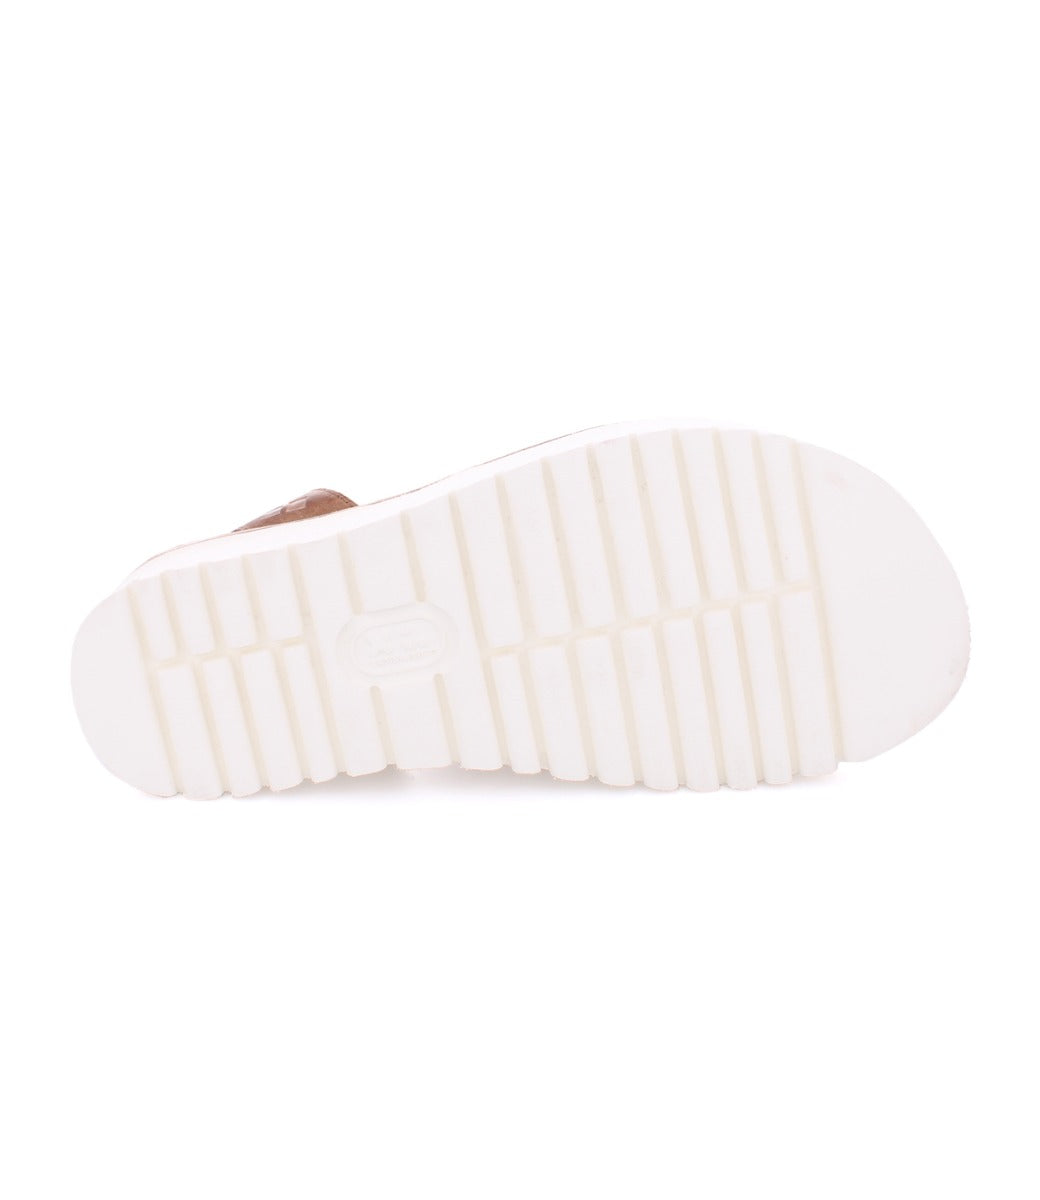 White sole of Clancy sandals by Bed Stu, made of tan leather.